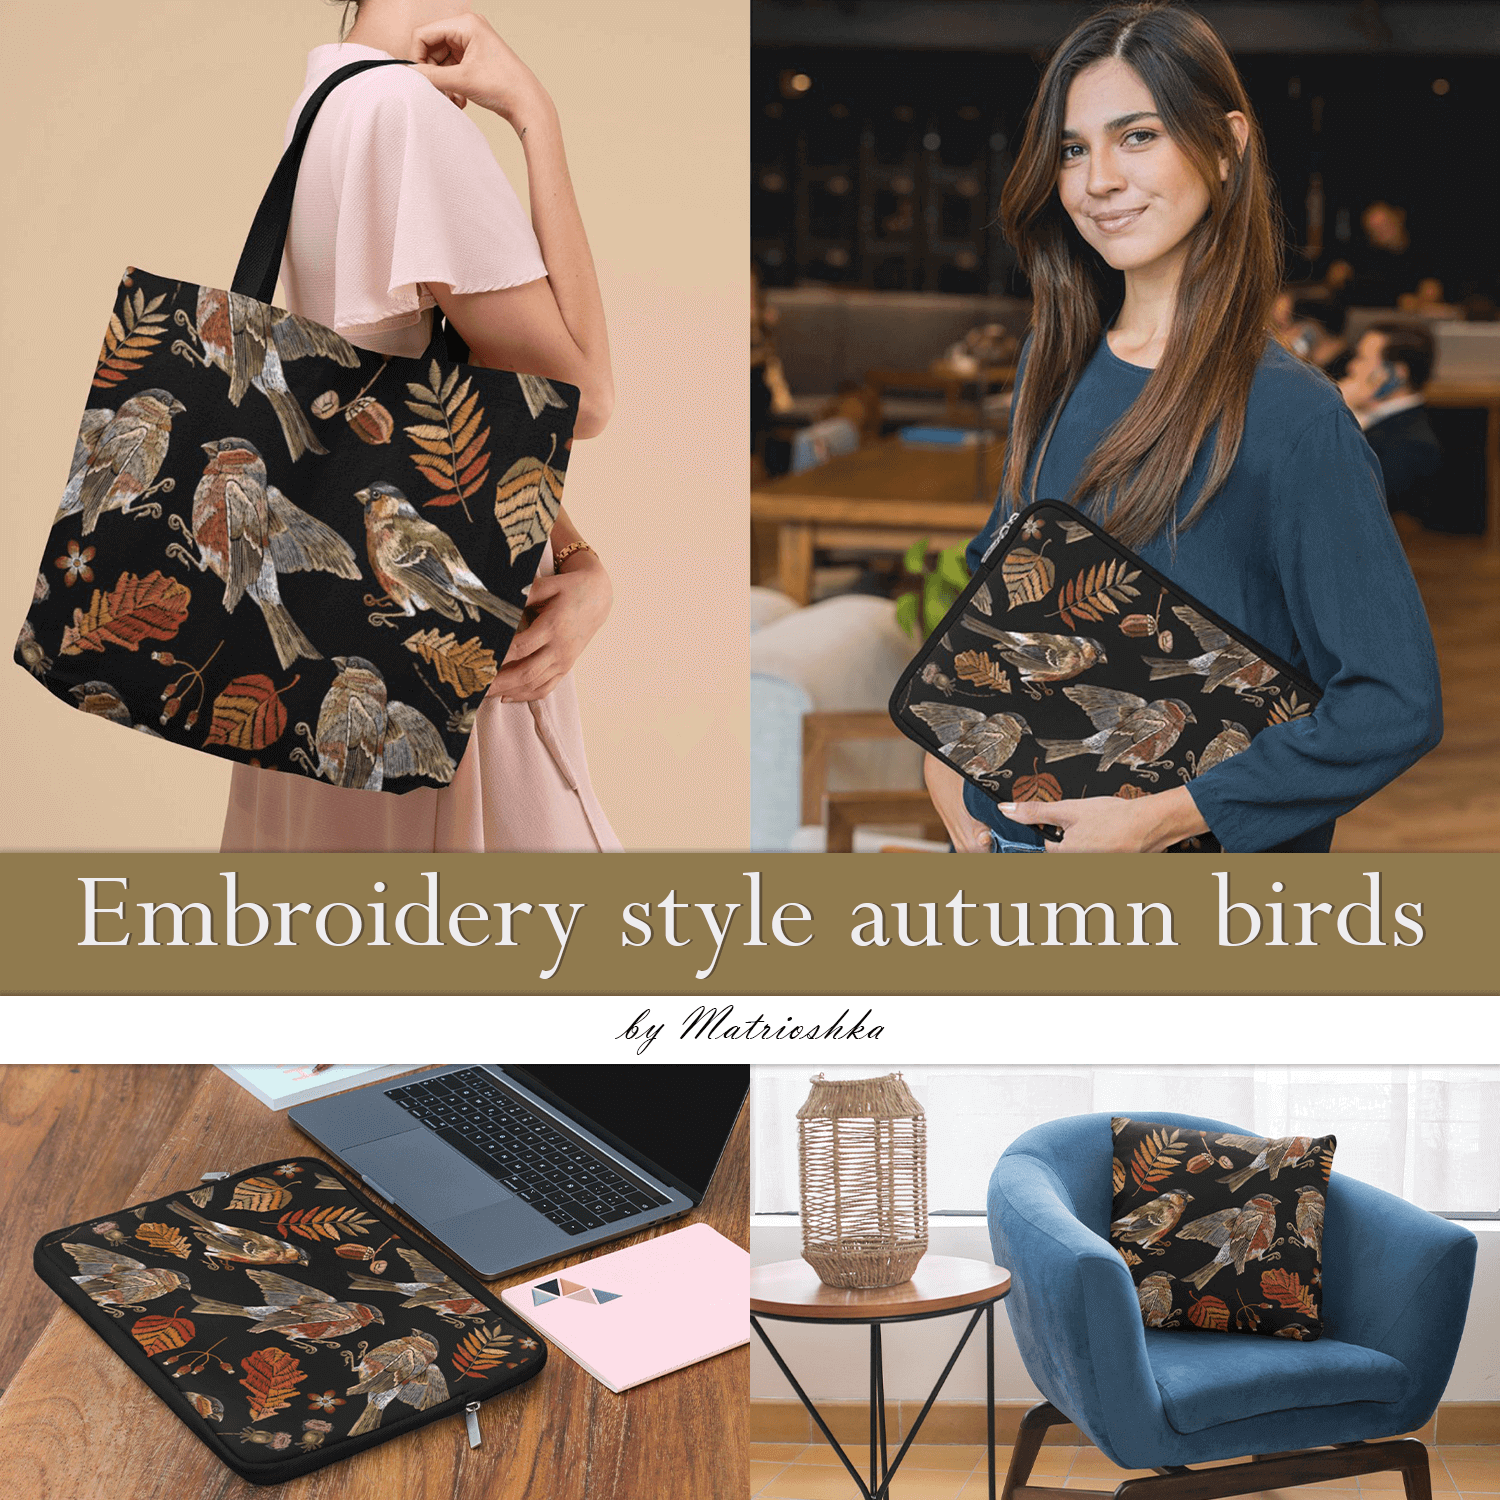 Embroidery in the style of autumn birds on women's bags together with charming models.